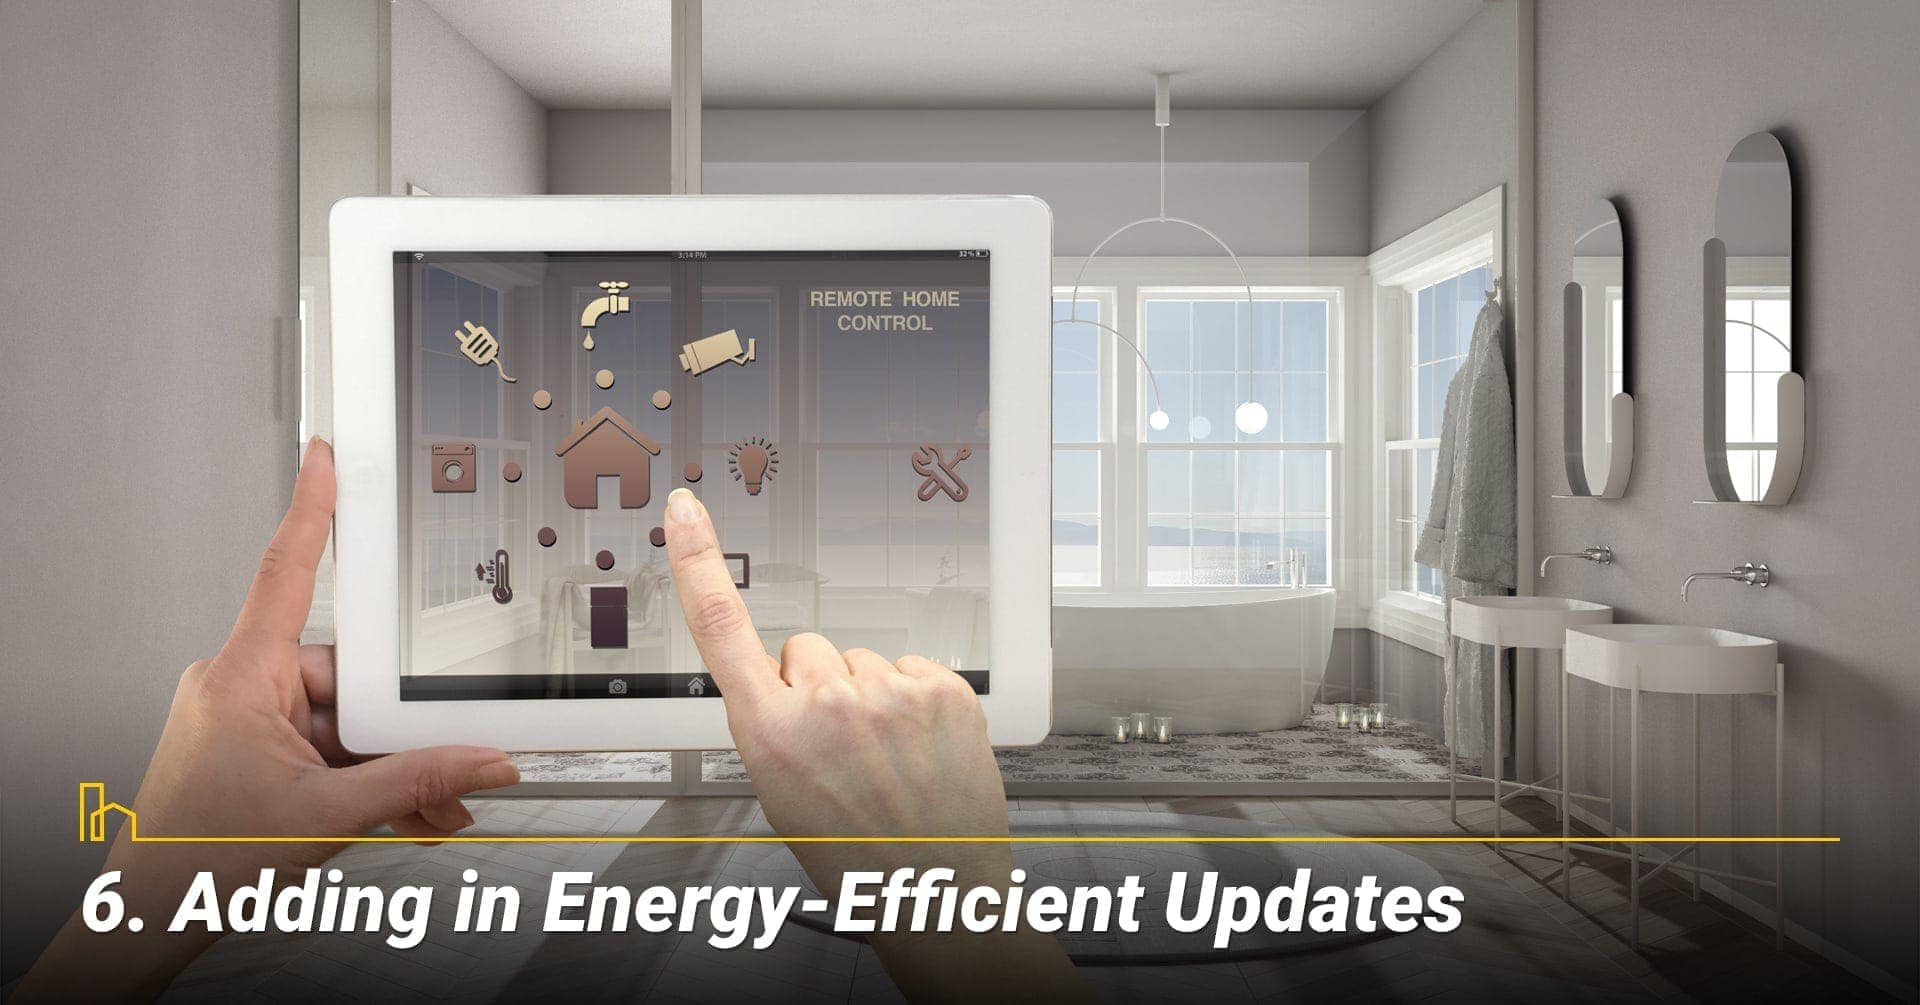 Adding in Energy-Efficient Updates, upgrade with energy efficient items